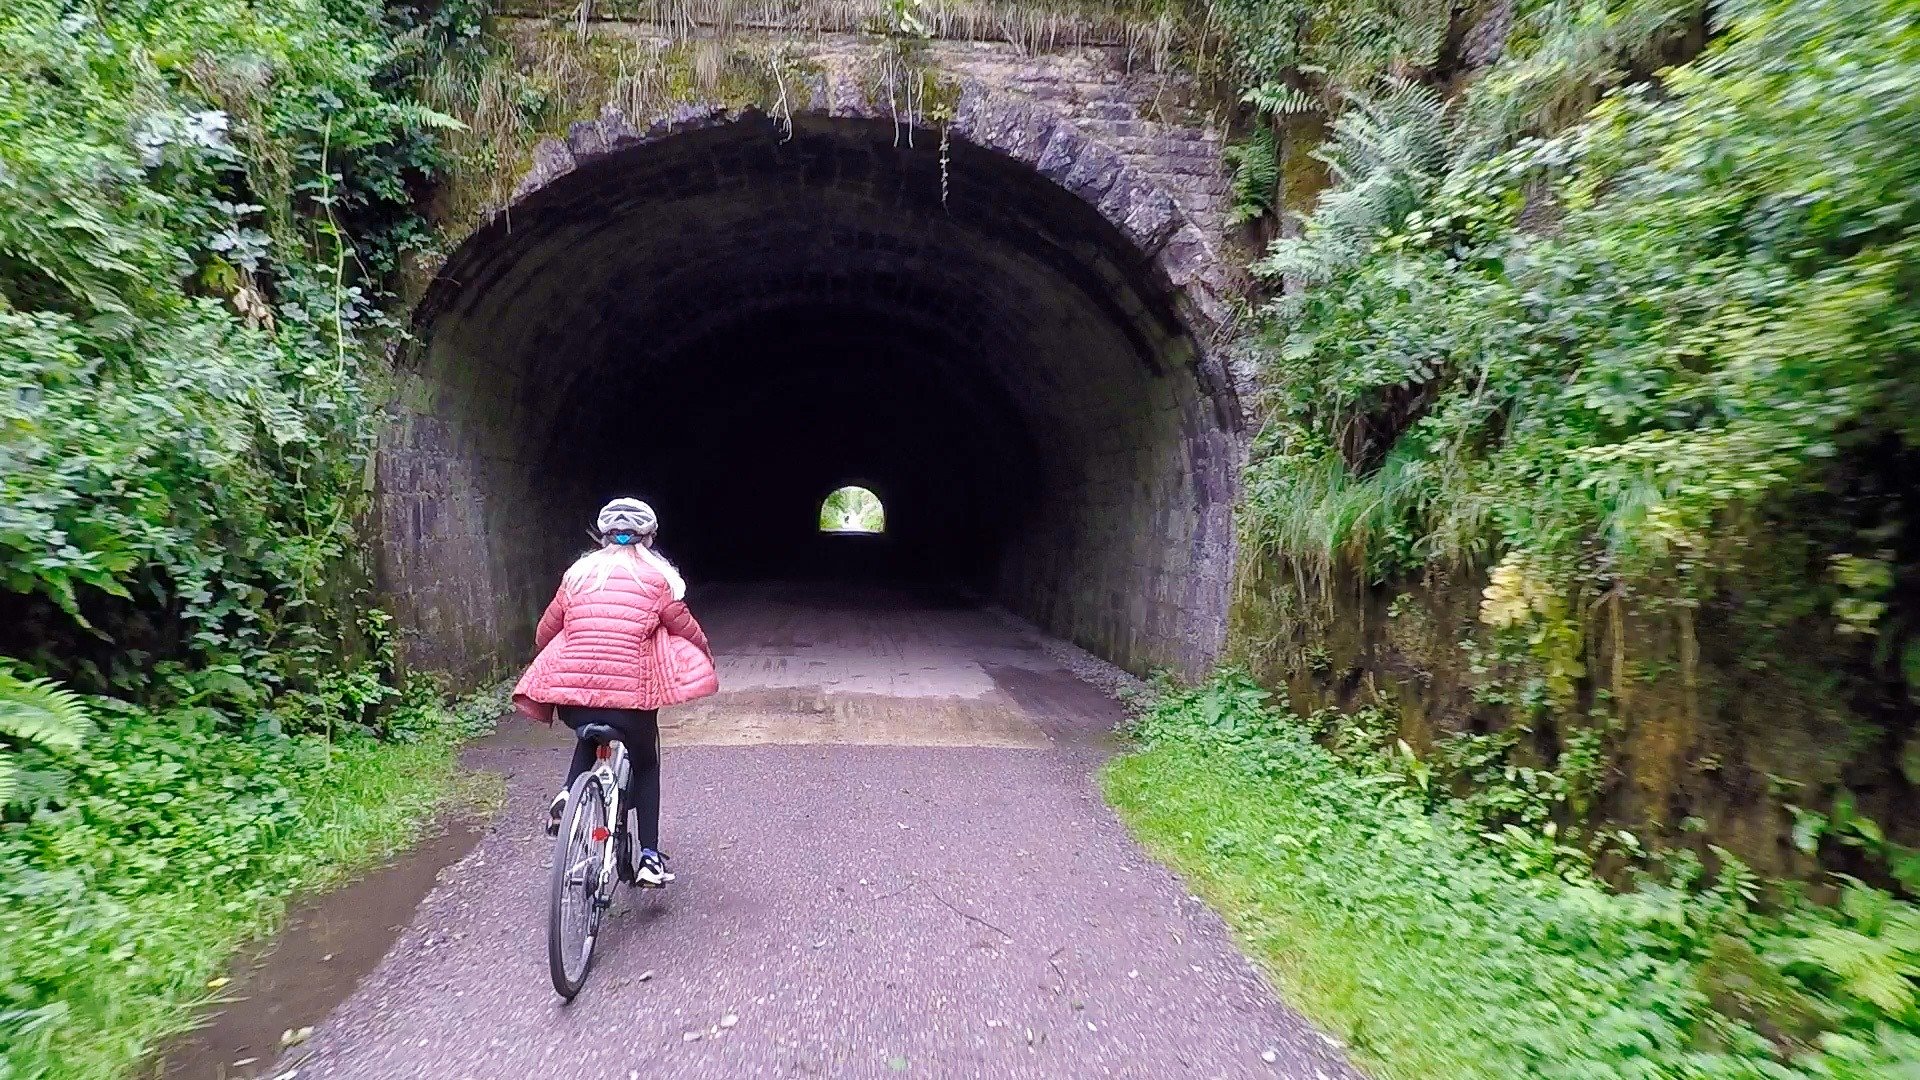  The tunnel at the start of the High Peak trail